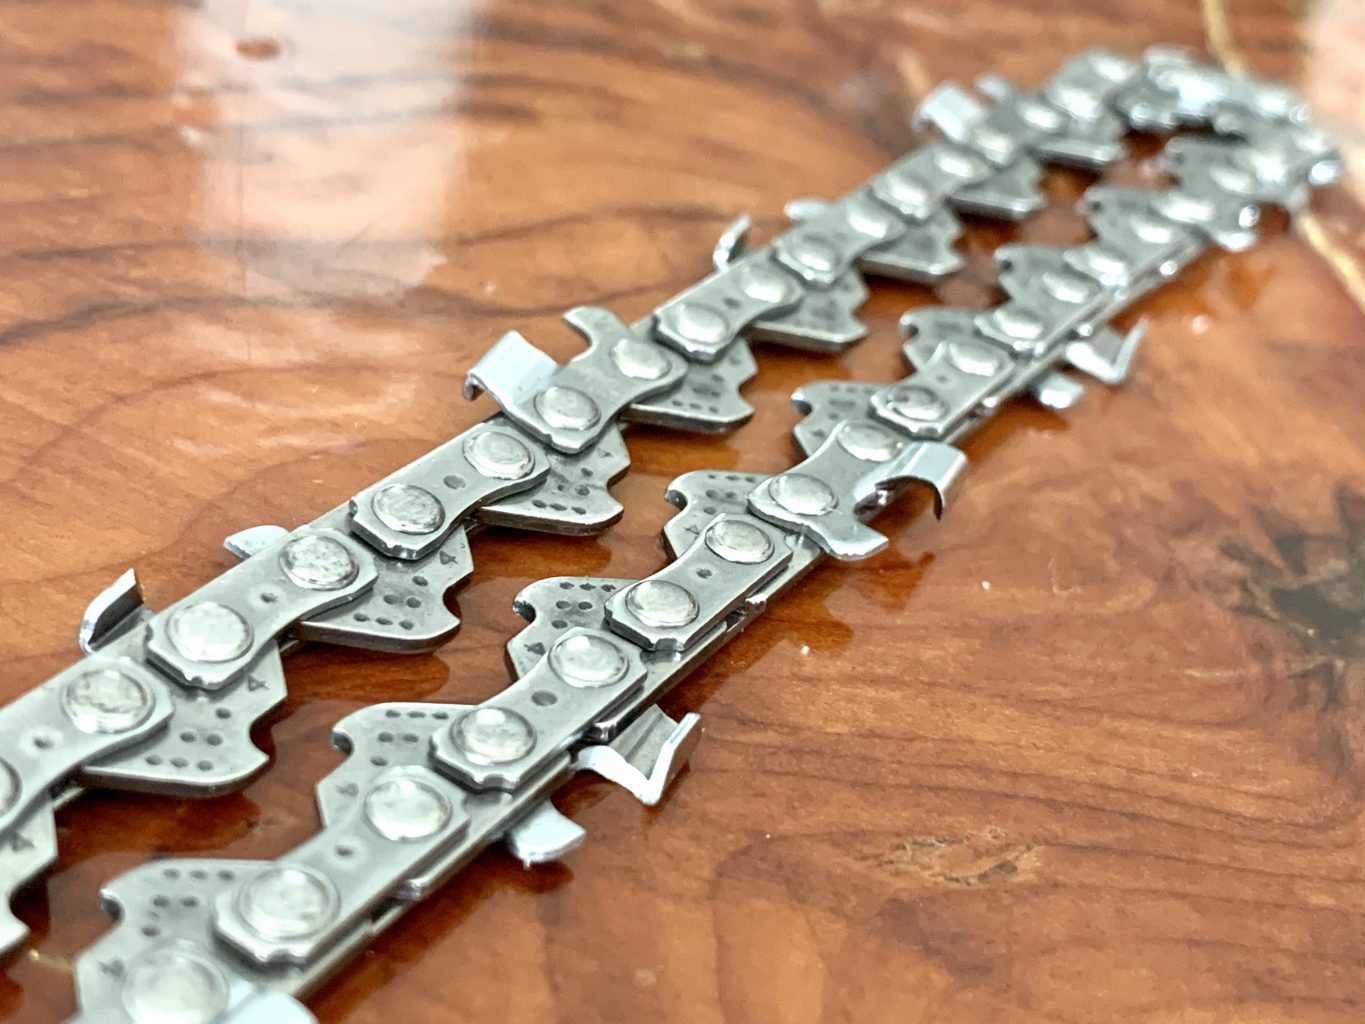 PMC Panther Mini Chain 1/4 .043 56 Drive Link Chain for 10"[25cm] Panther Mini Bars